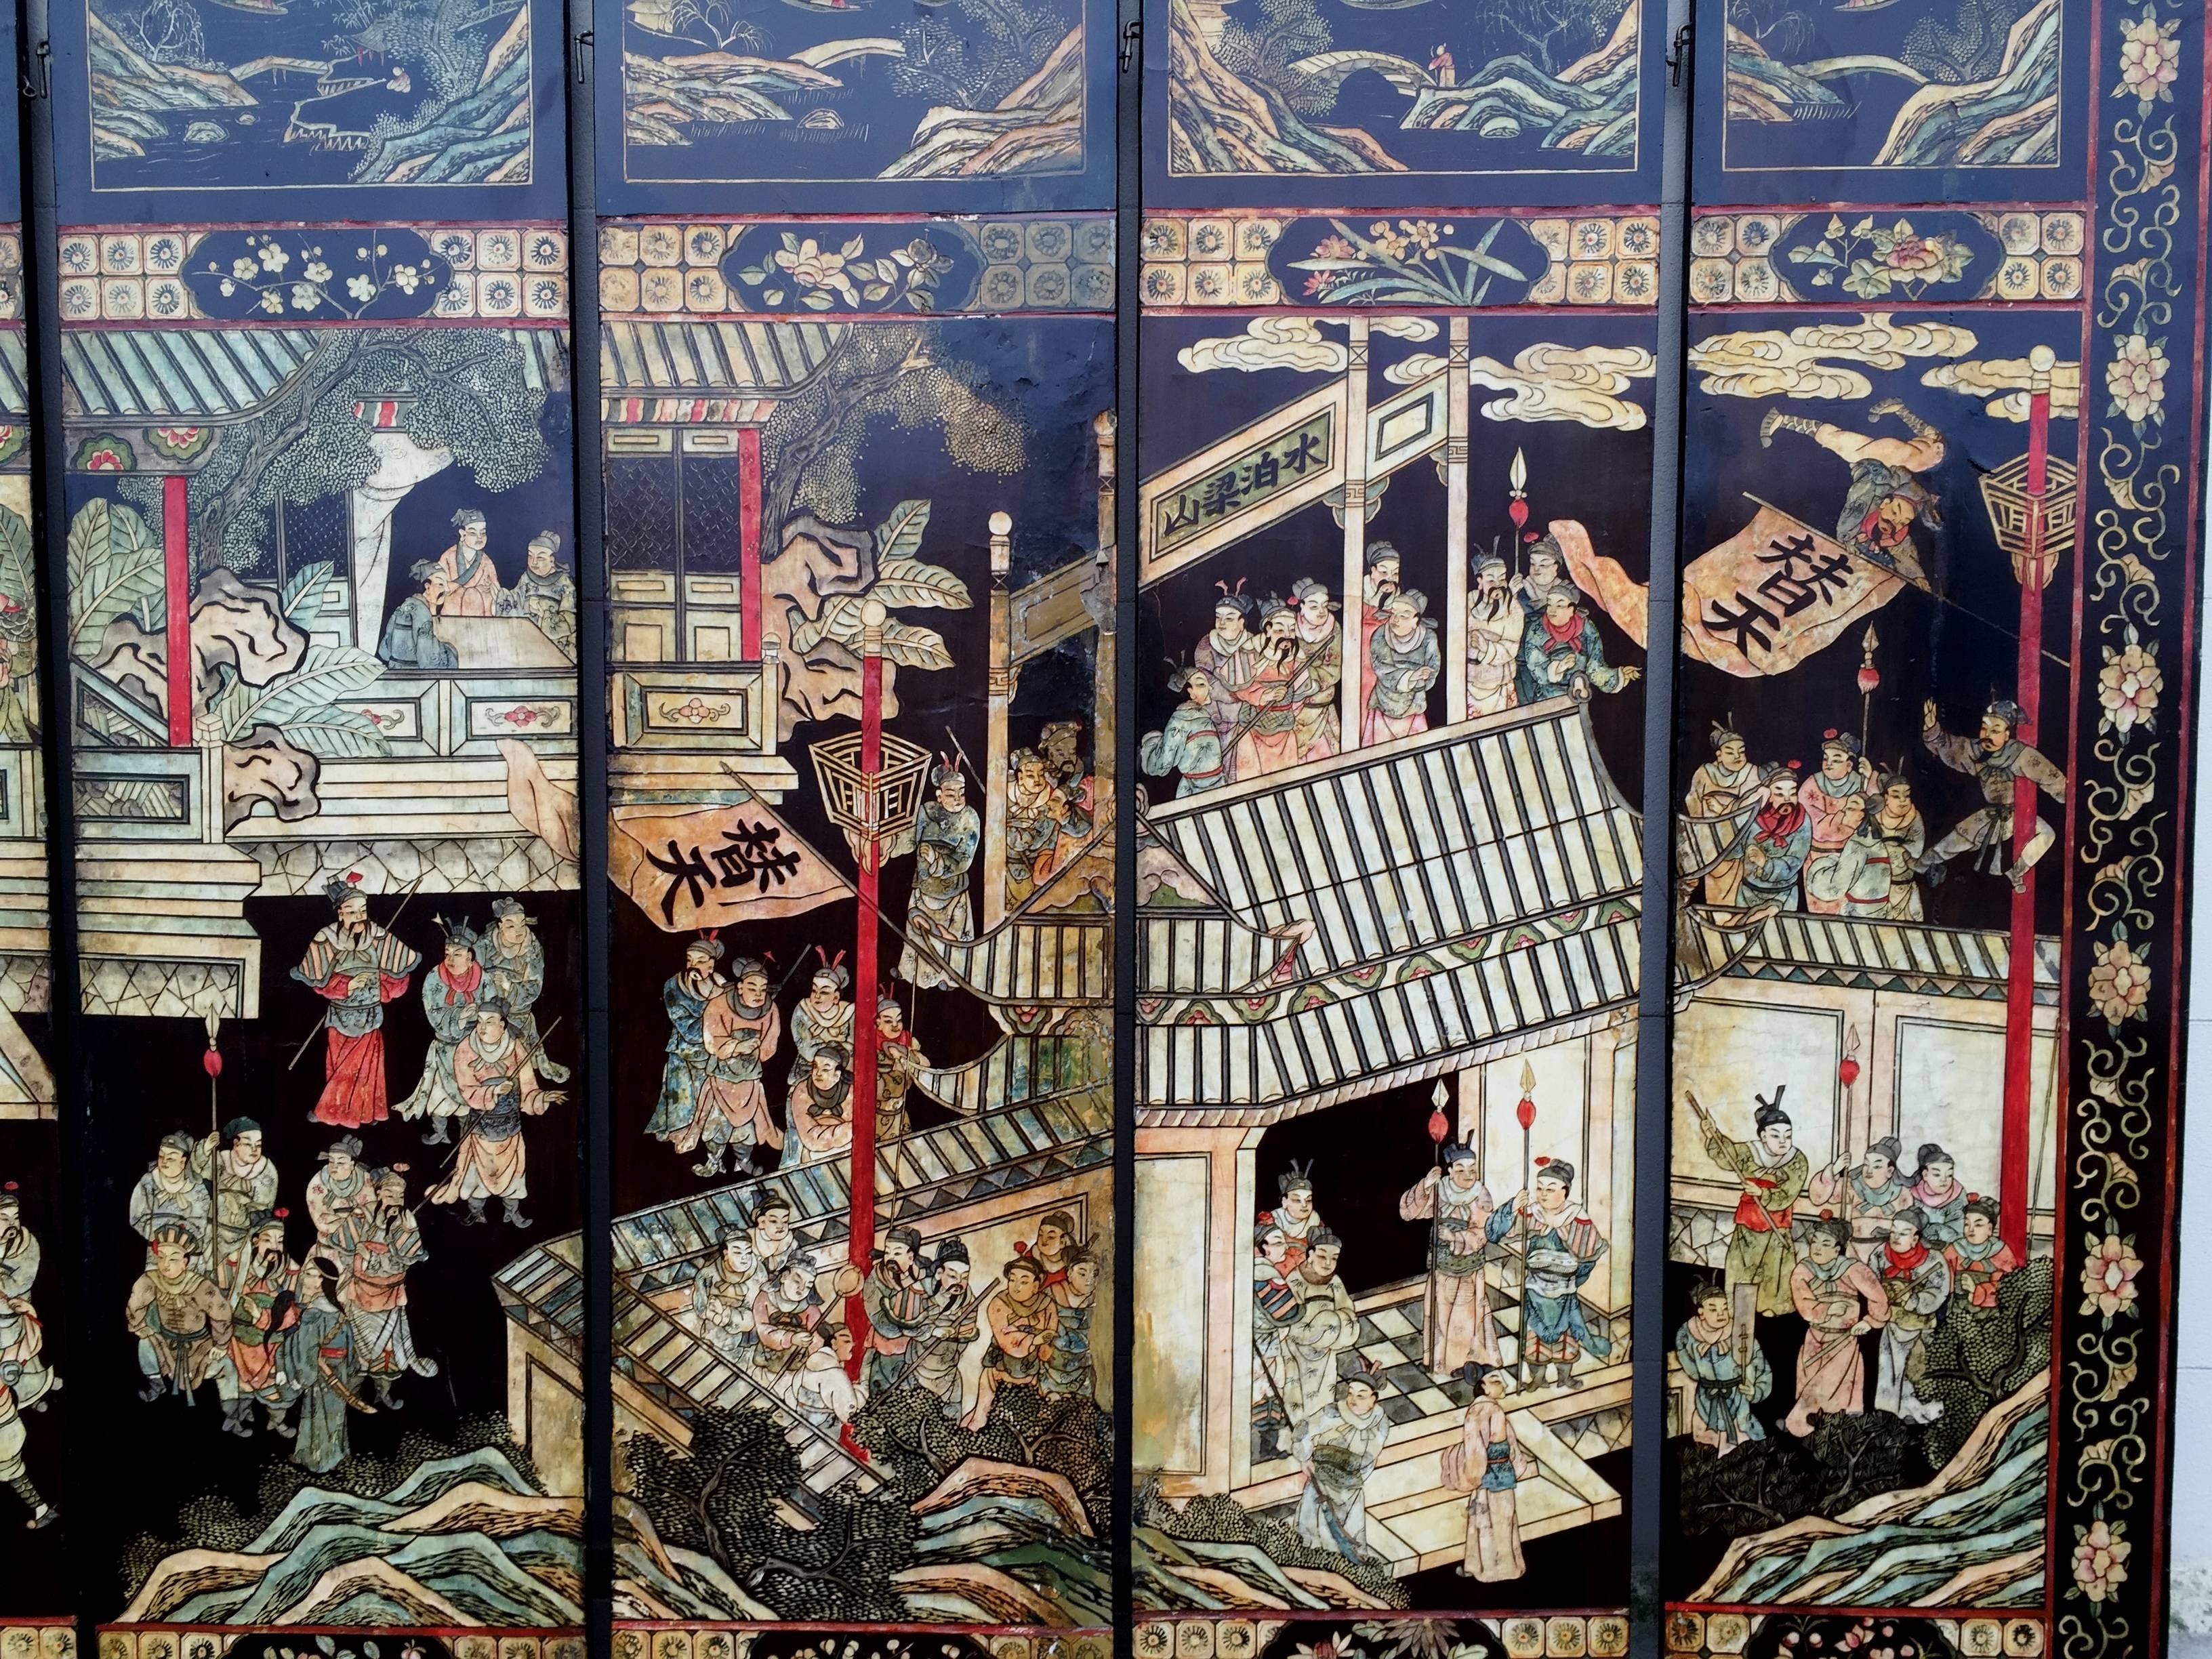 A very impressive and decorative 19th century Chinese coromandel lacquer eight fold screen, depicting a busy palace scene above floral panels. The reverse also decorated with various different panels of people in the garden, flowers and mountains.